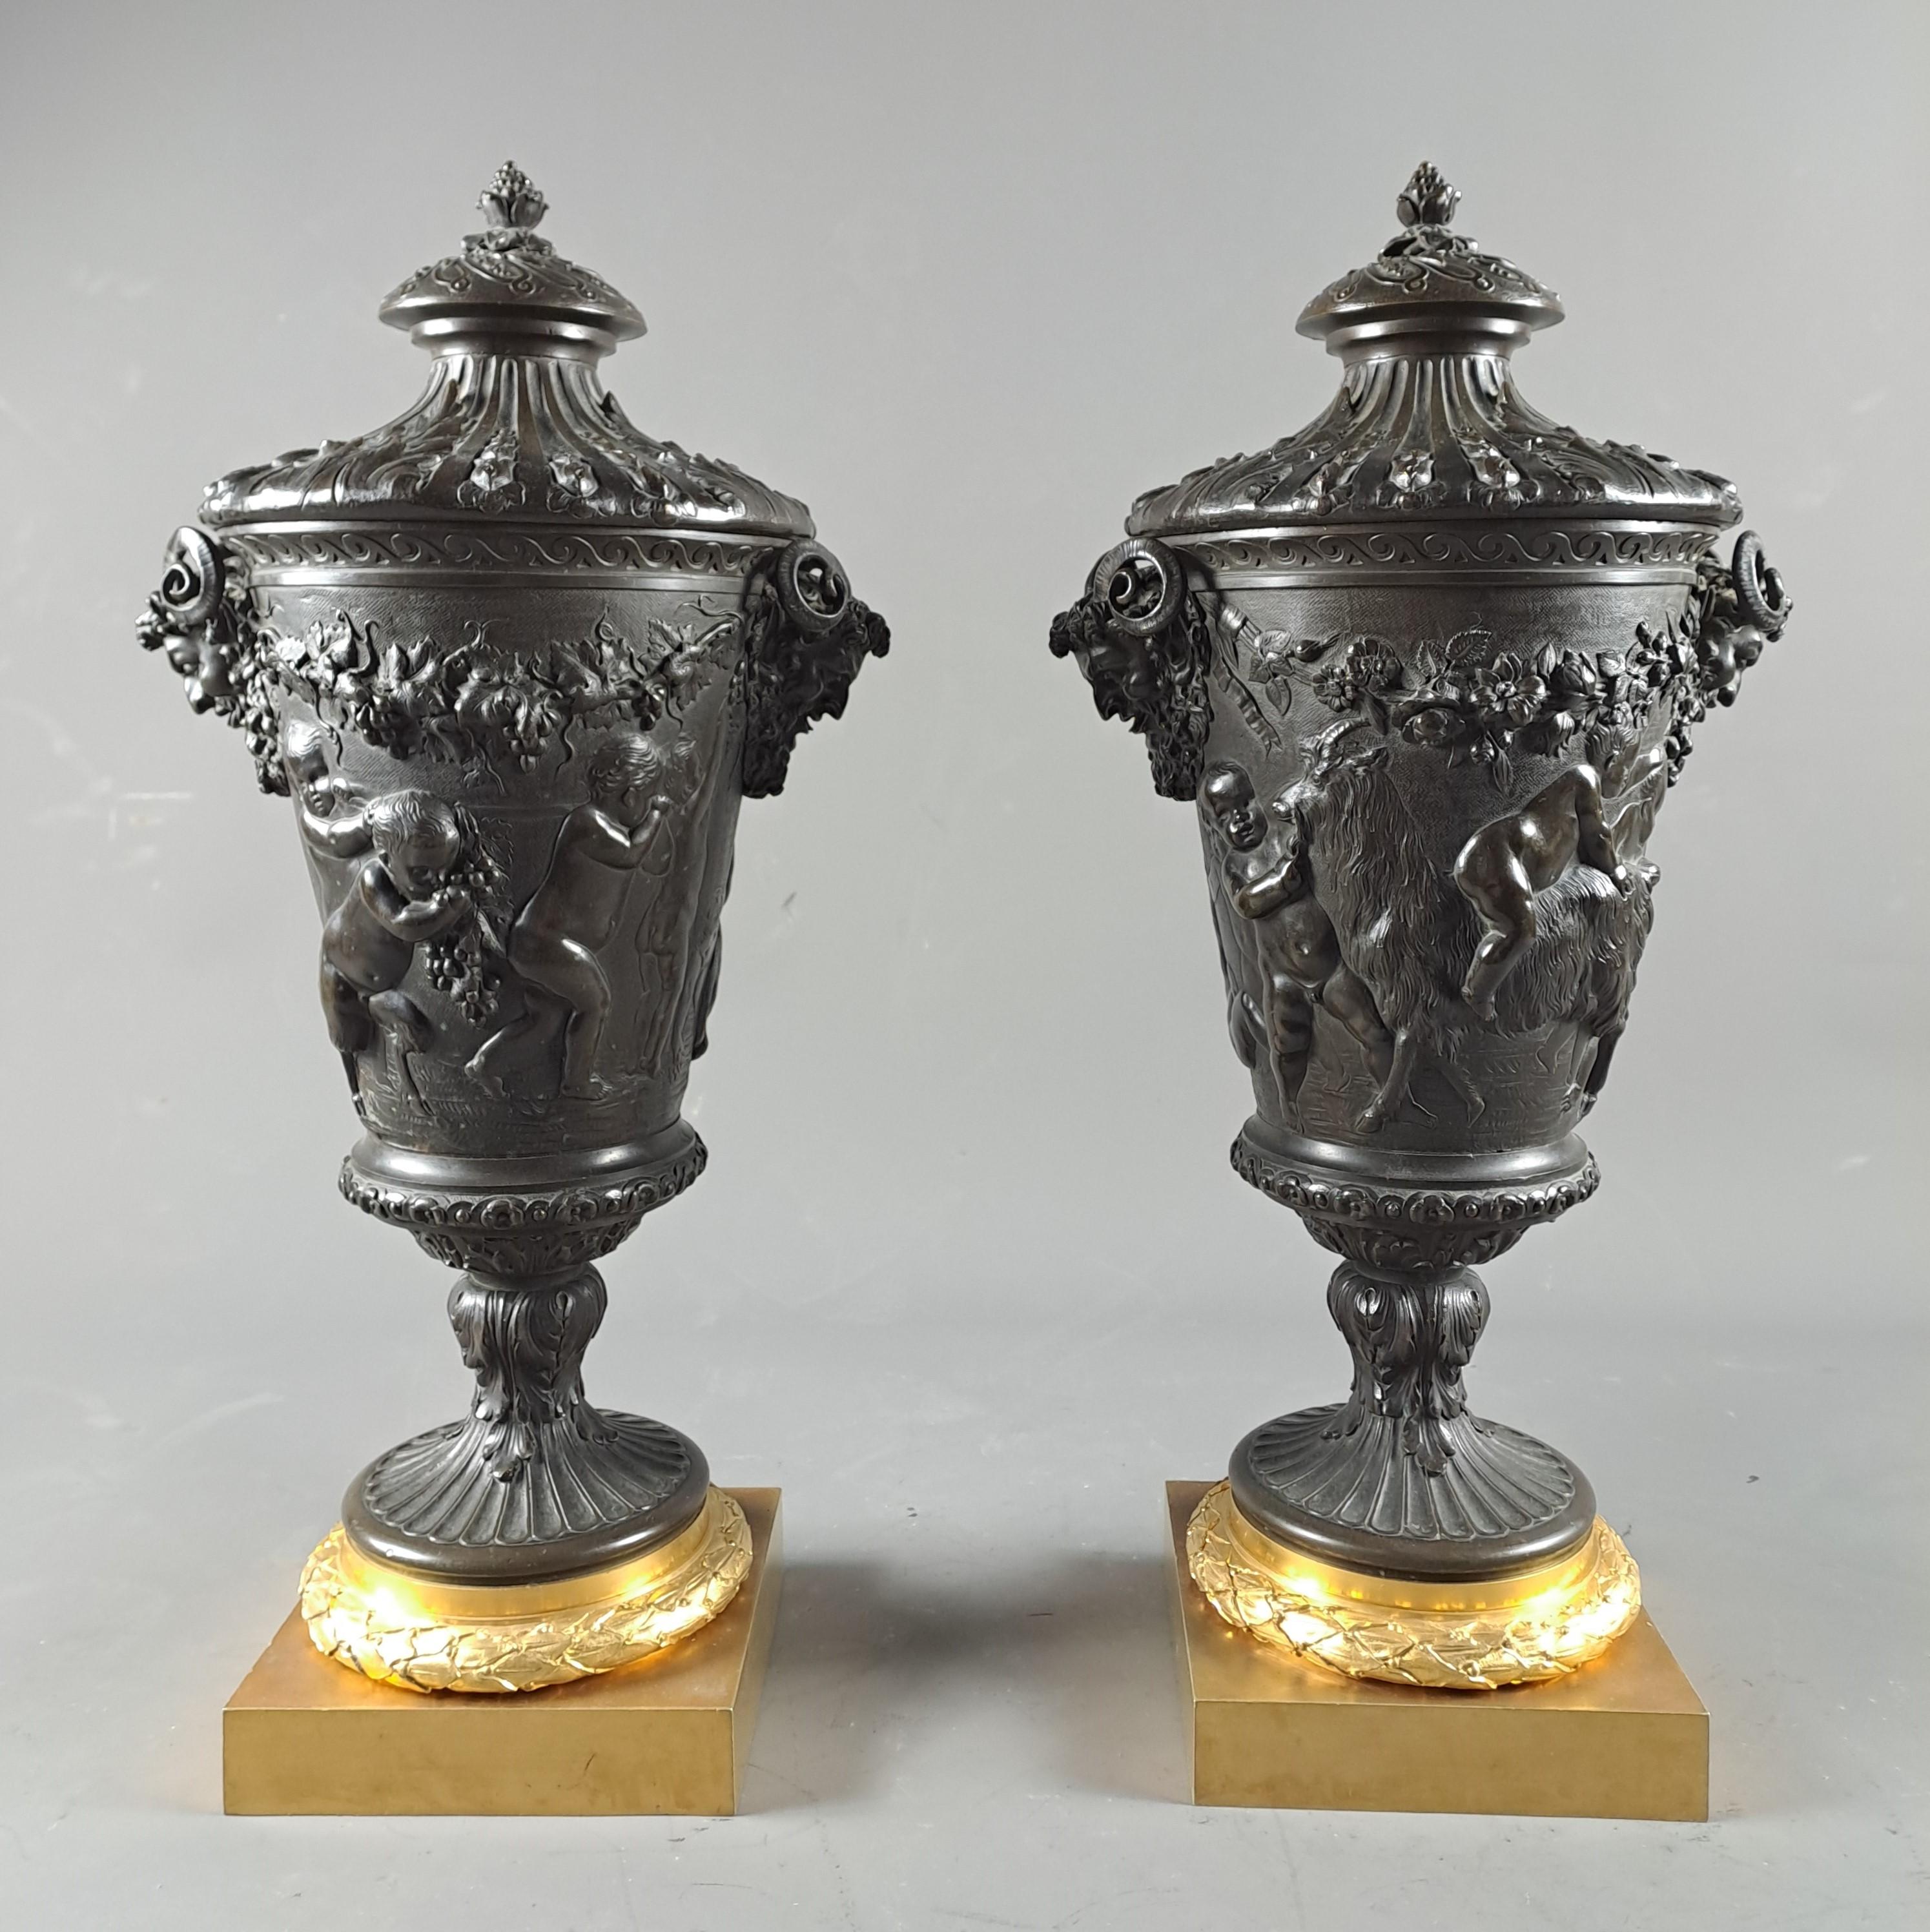 Exceptional pair of large covered vases in gilded bronze and brown patina presenting a rich bas relief decoration of neoclassical inspiration appearing in friezes of bacchanals of putti, satyrs, rams...
The handles are in the shape of a bearded